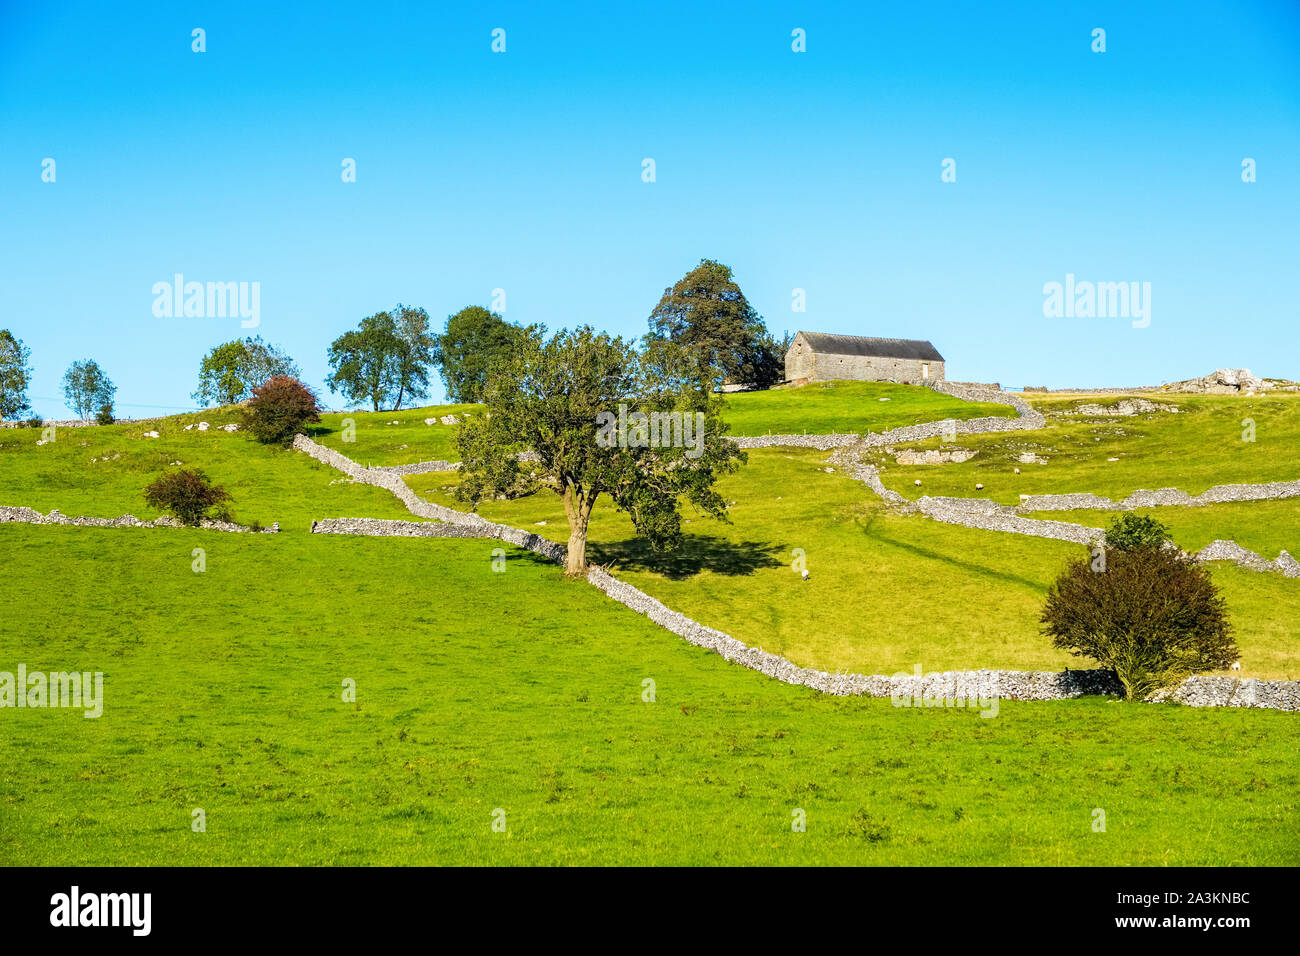 Typical White Peak landscape of fields and dry stone walls, Peak District National Park, Derbyshire,UK Stock Photo